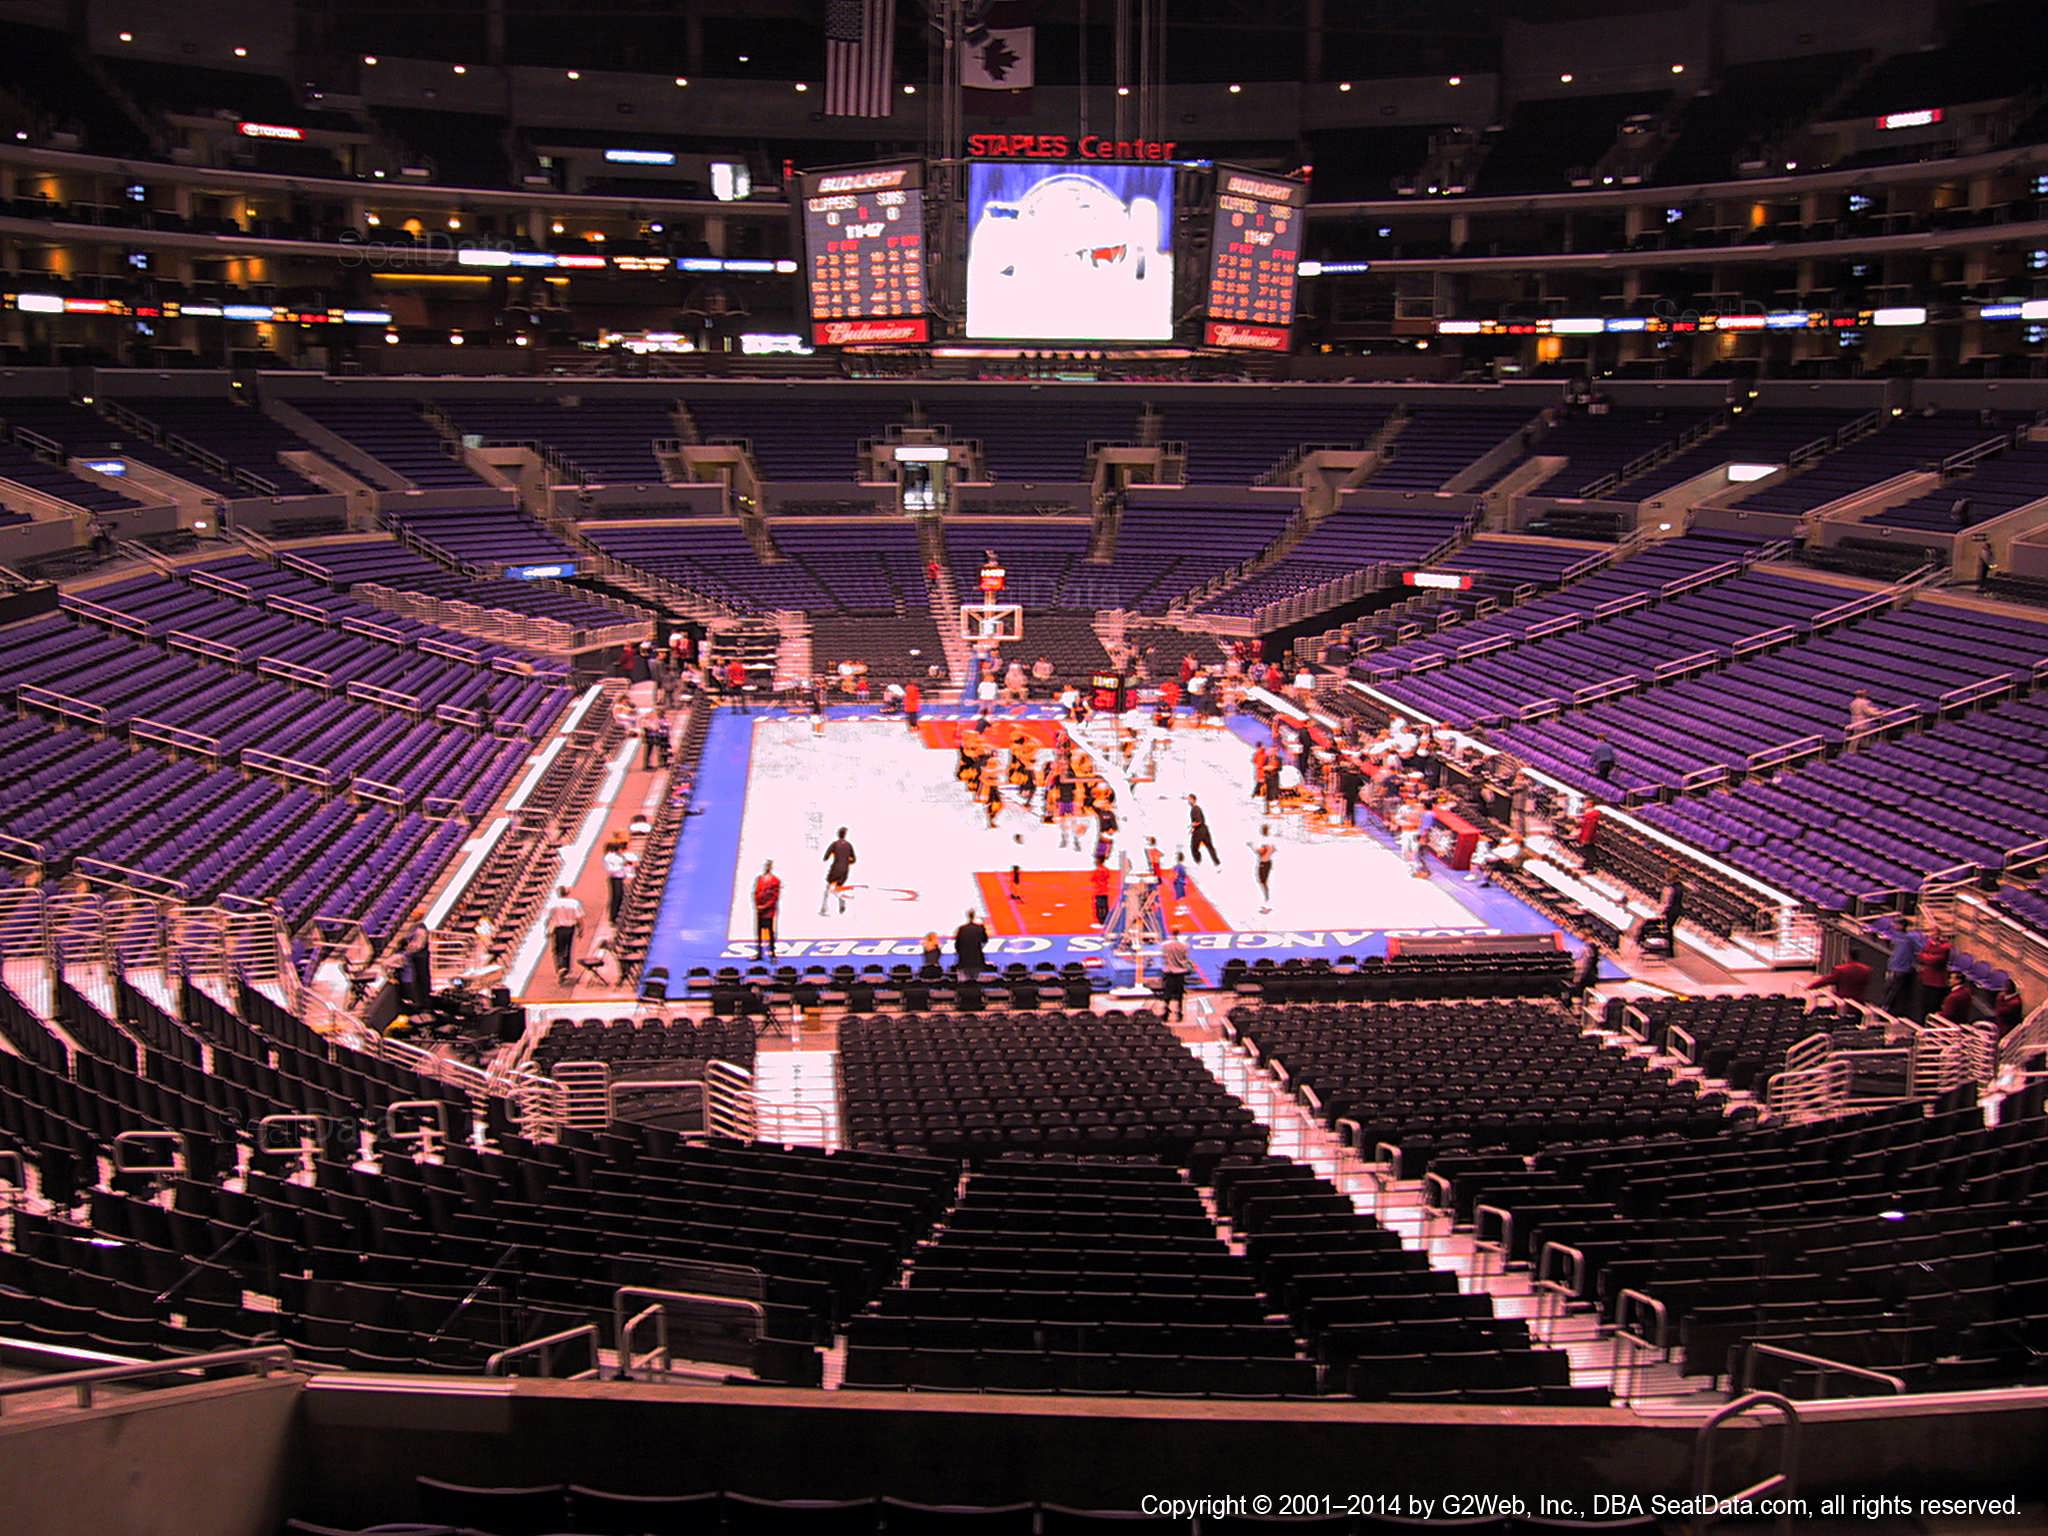 Staples Center Section 208 - Clippers/Lakers - RateYourSeats.com2048 x 1536